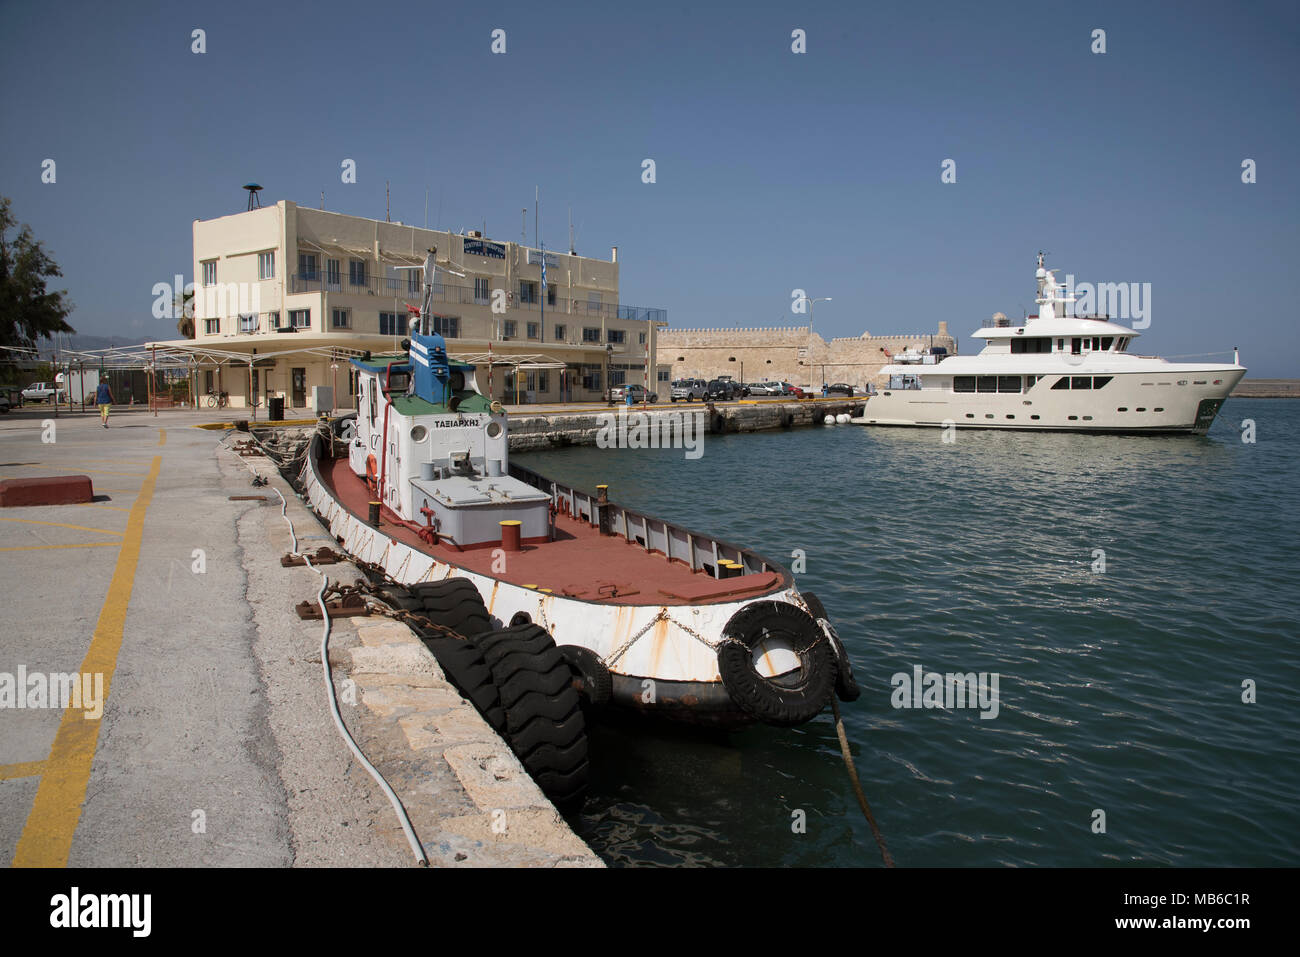 Heraklion Port, Crete, Greece. The harbour and Hellenic Coast Guard building on the harbourside. 2017 Stock Photo